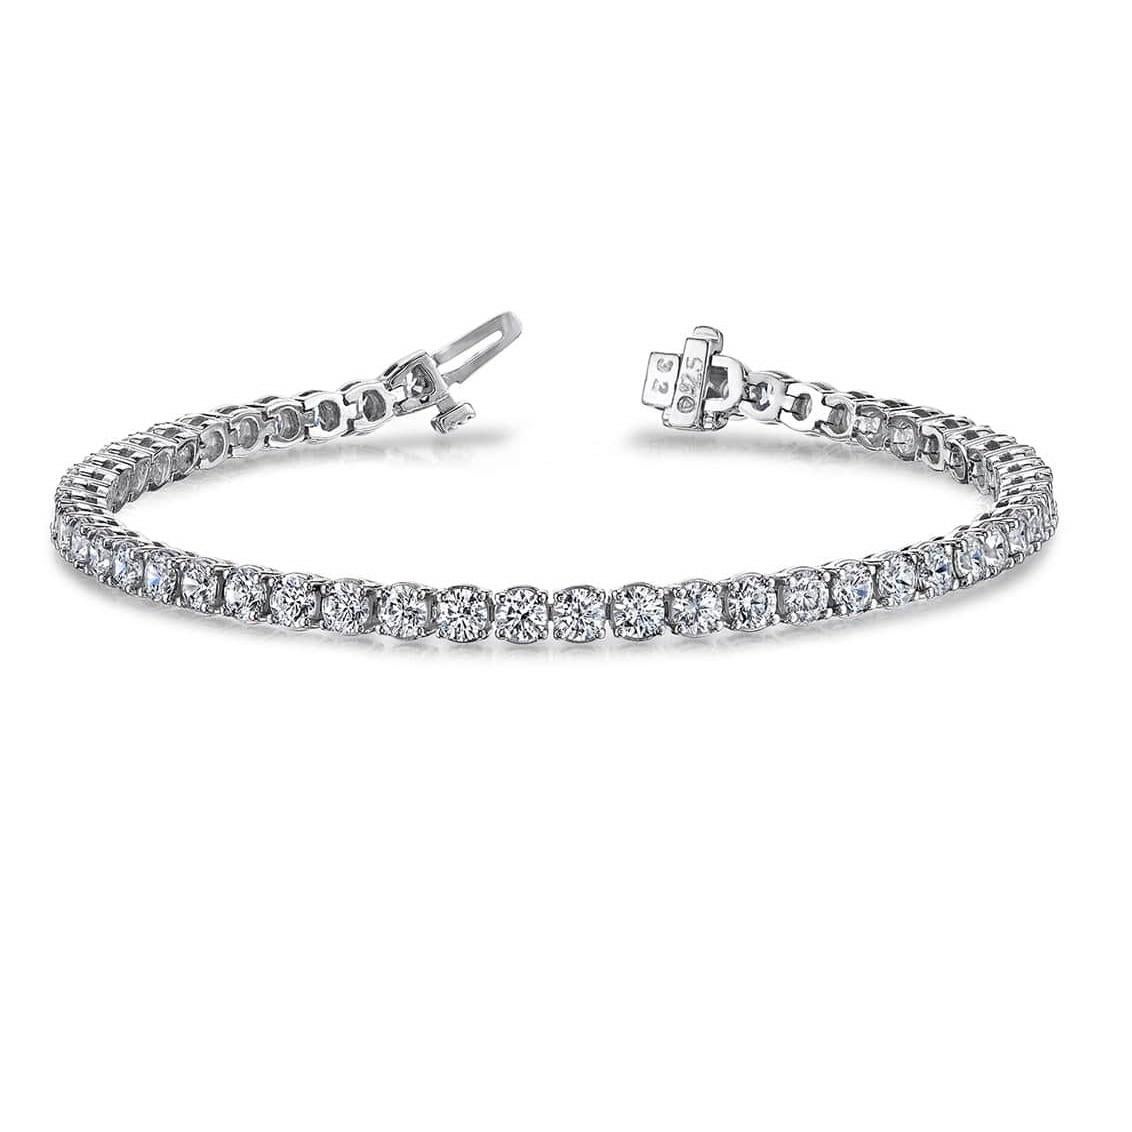 This bracelet exudes a timeless and radiant charm. It showcases round white diamonds, securely held in a four-prong setting, with a total weight of 8.90 carats. The piece is meticulously crafted in 14k White Gold, and the 44 diamonds possess H-I